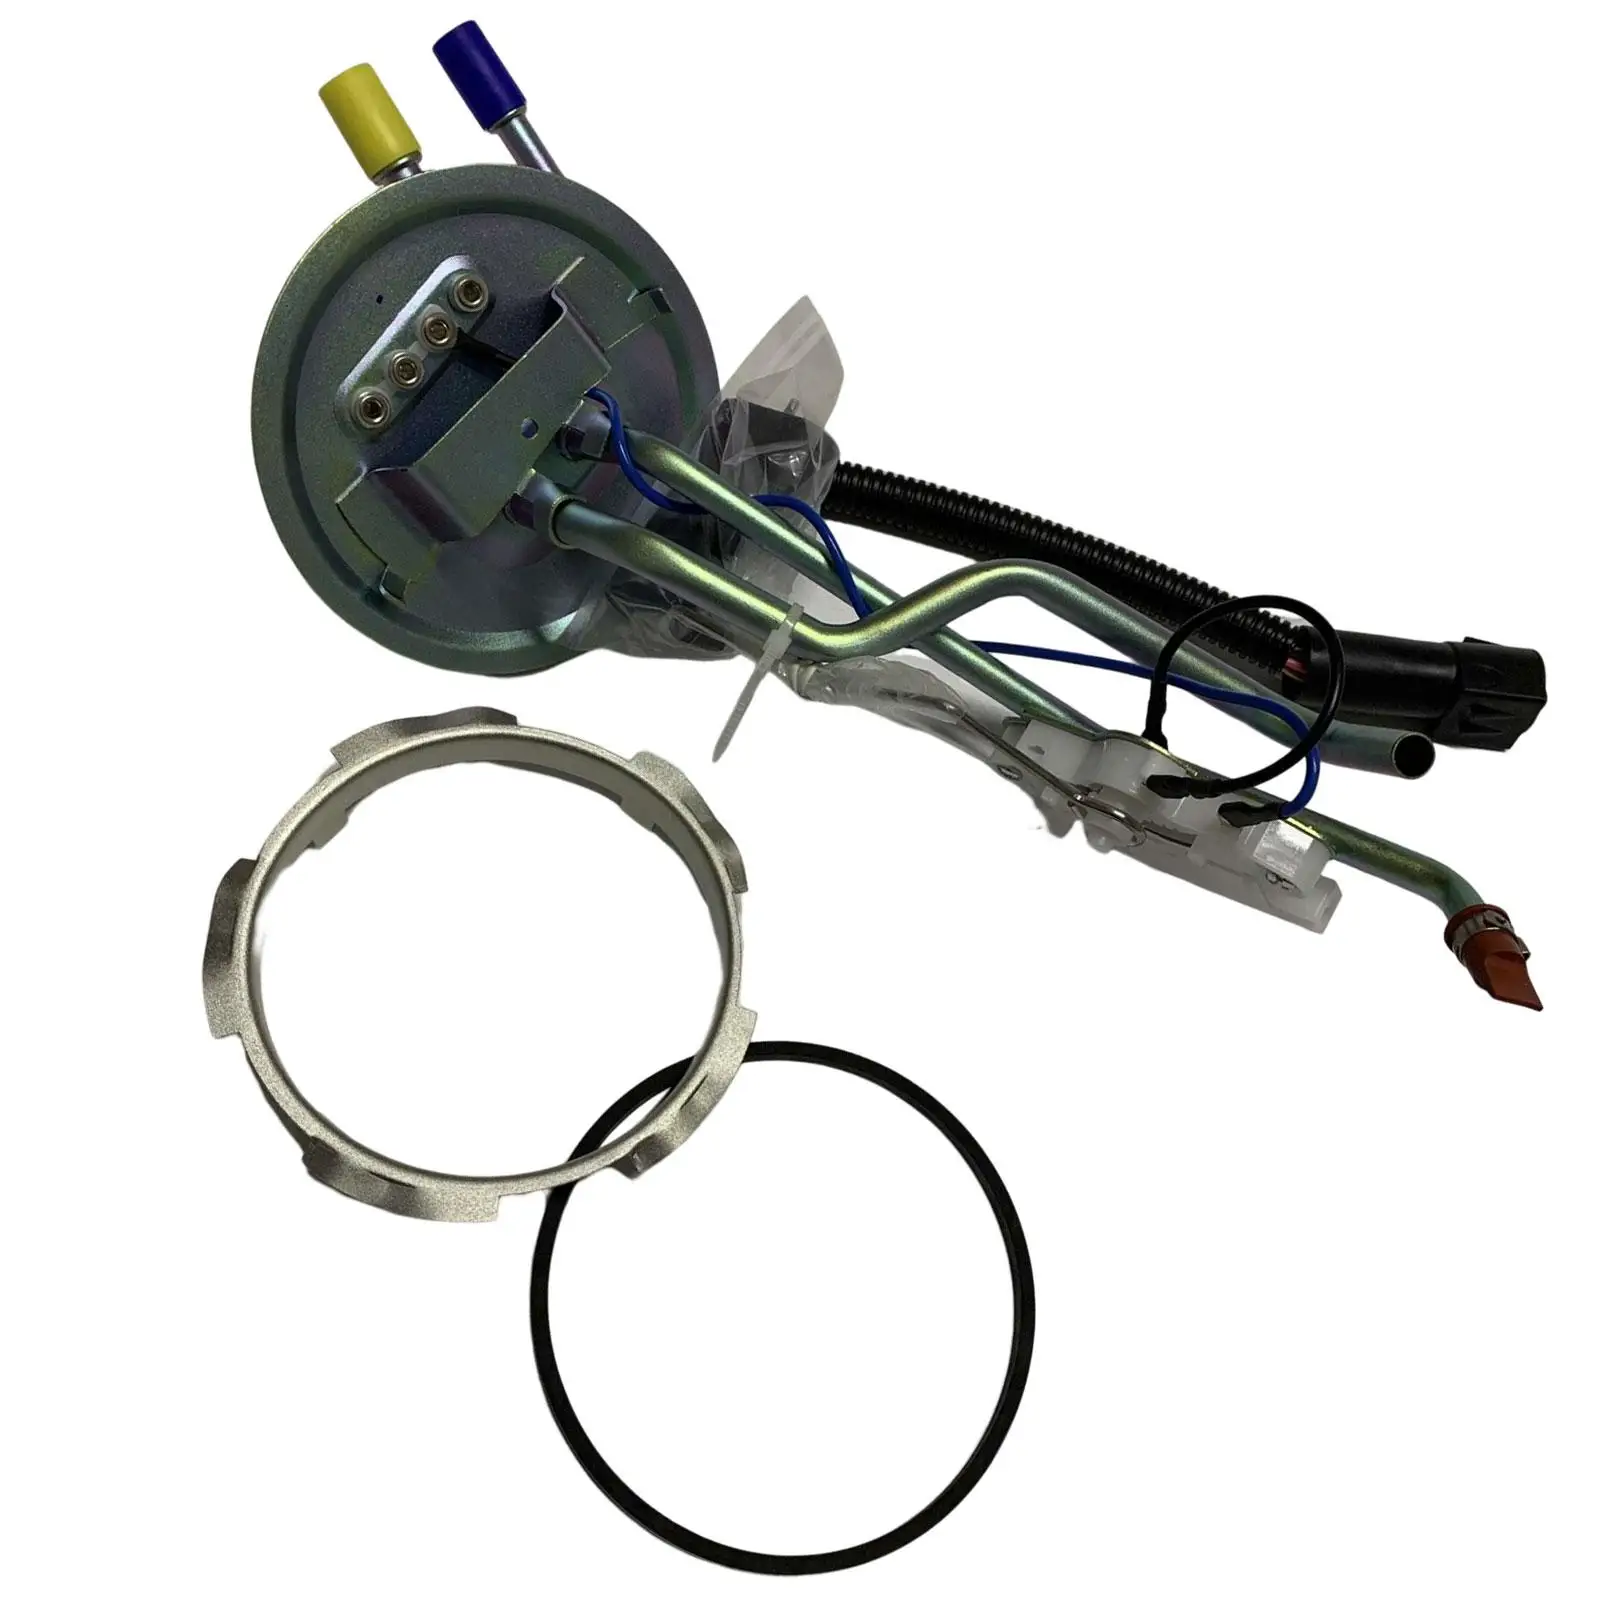 Electric Fuel Pump Module Assembly Replaces Parts for Ford F250 F350 1994-1997 Accessories Easy Installation Durable